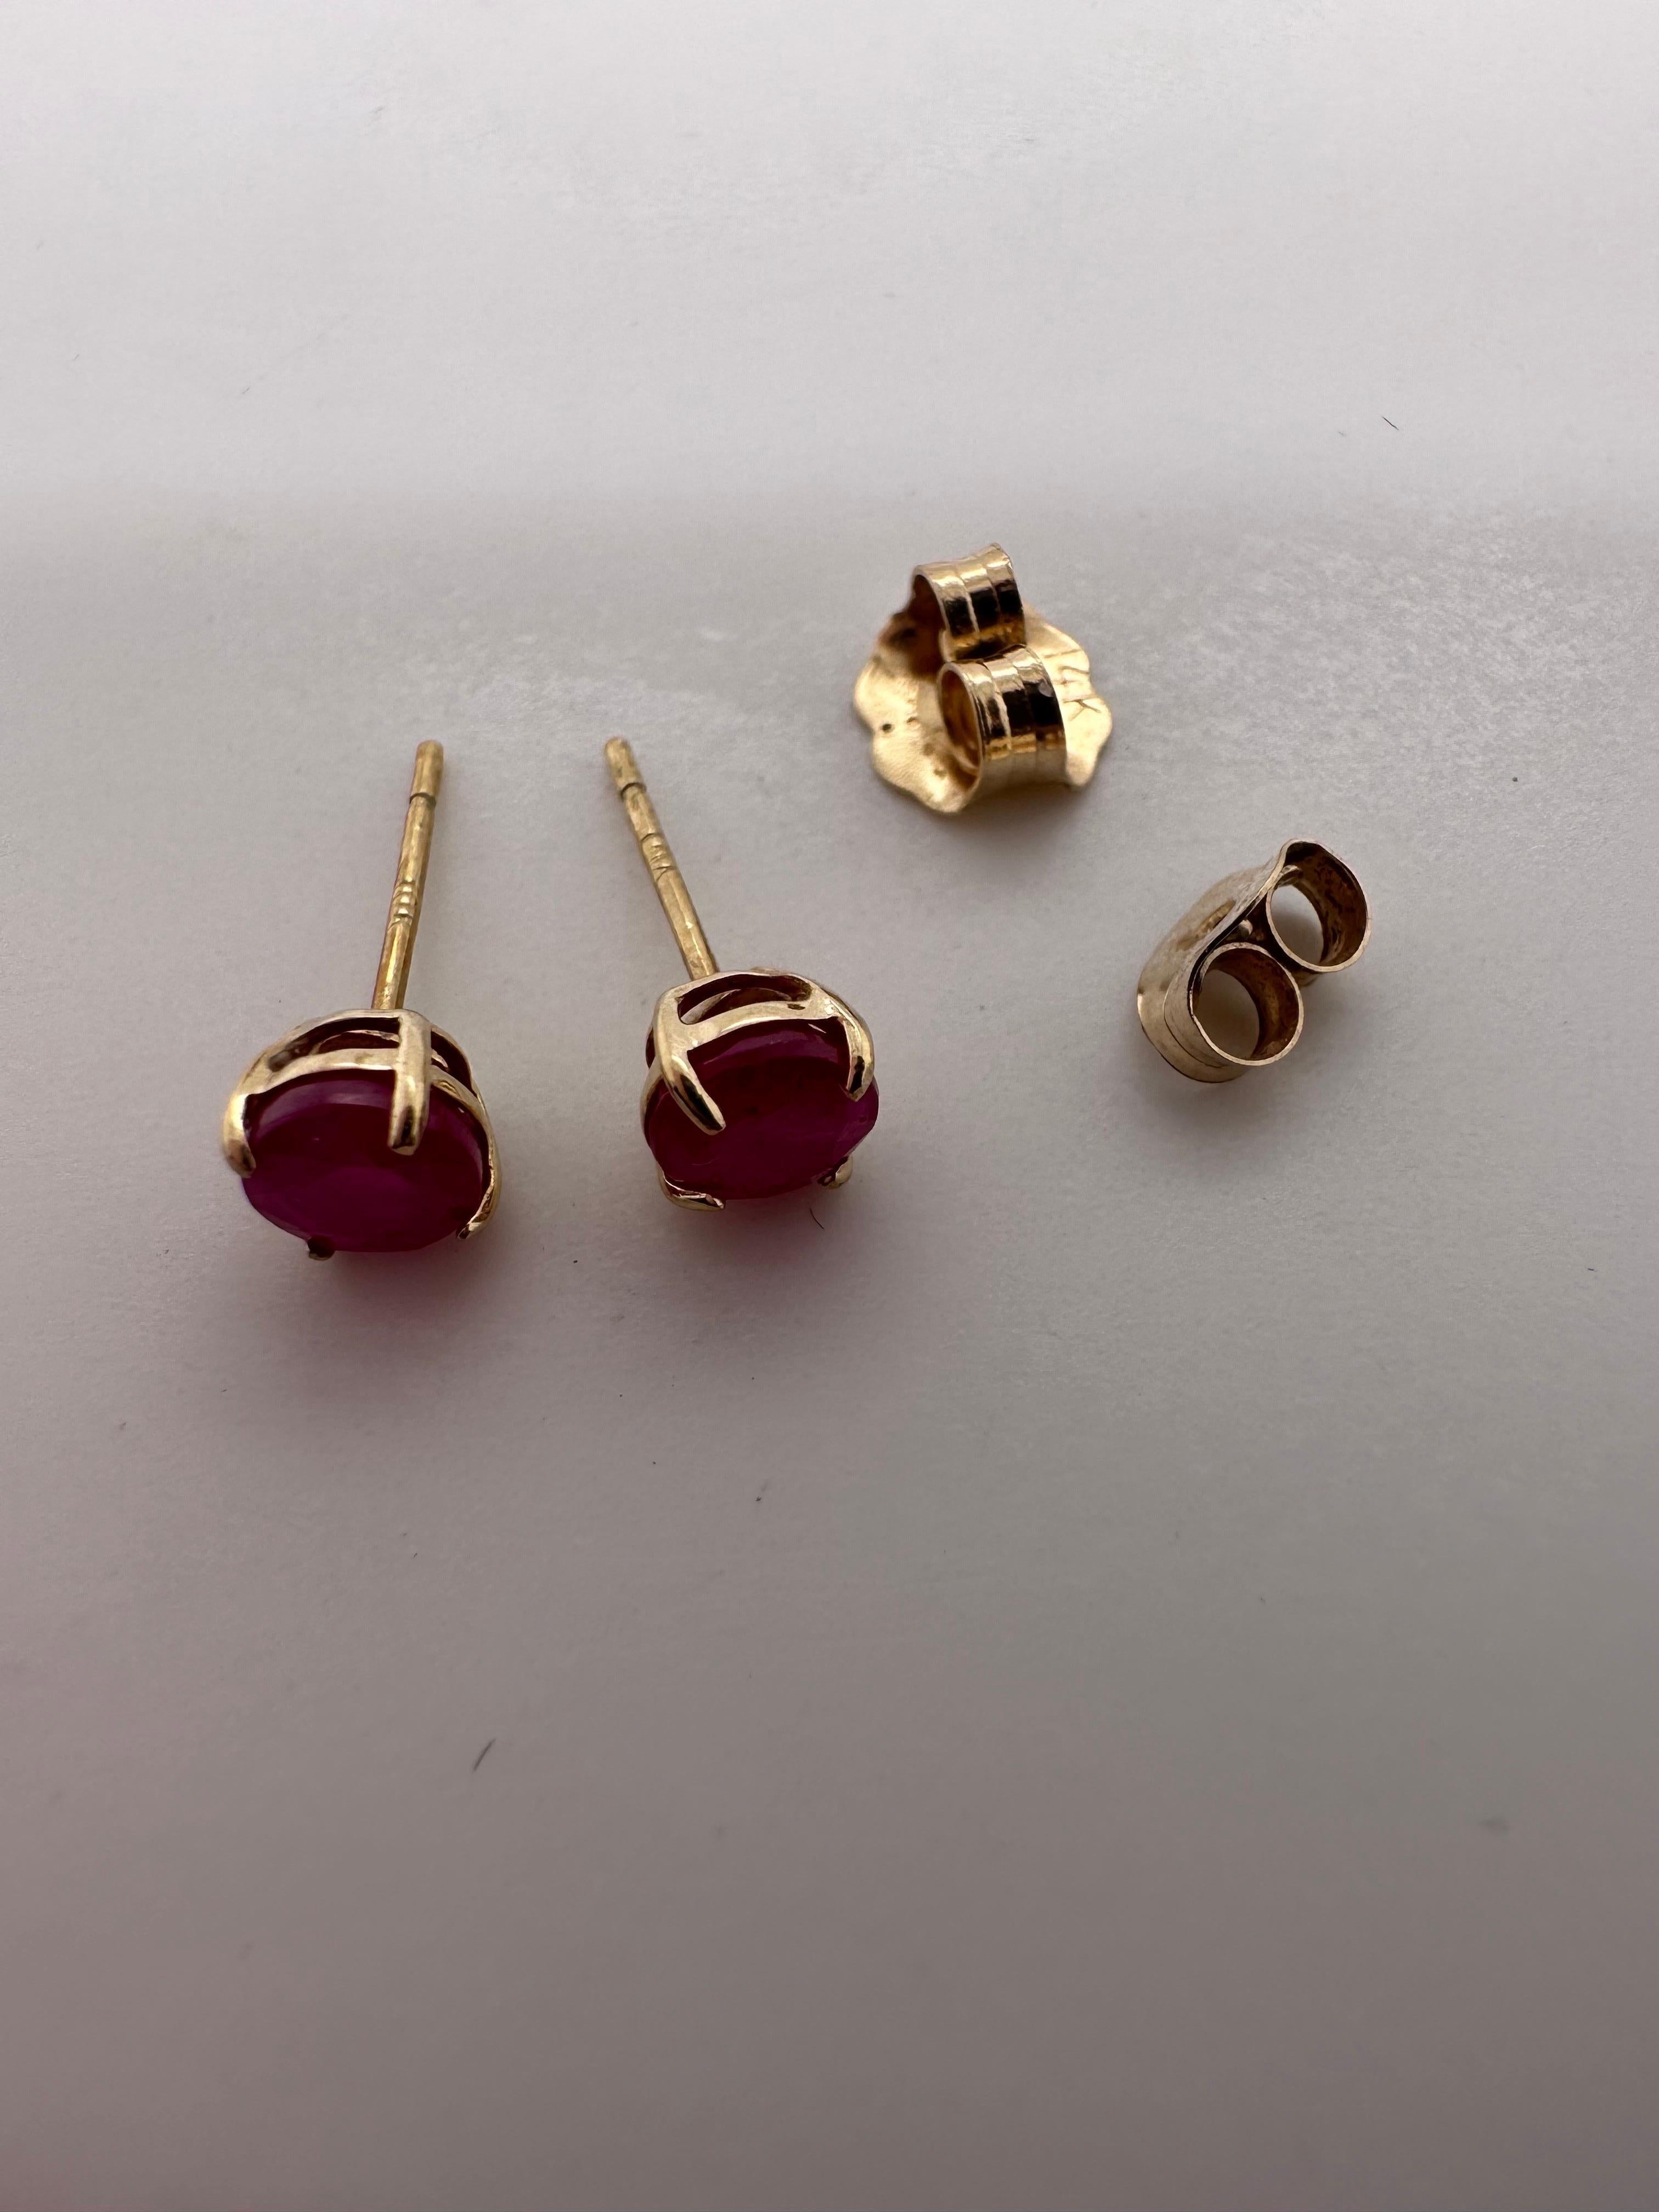 5mm ruby studs in 14kt yellow gold, pretty pink- red rubies 100% natural.

Certificate of authenticity comes with purchase!
ABOUT US
We are a family-owned business. Our studio in located in the heart of Boca Raton at the International Jewelers